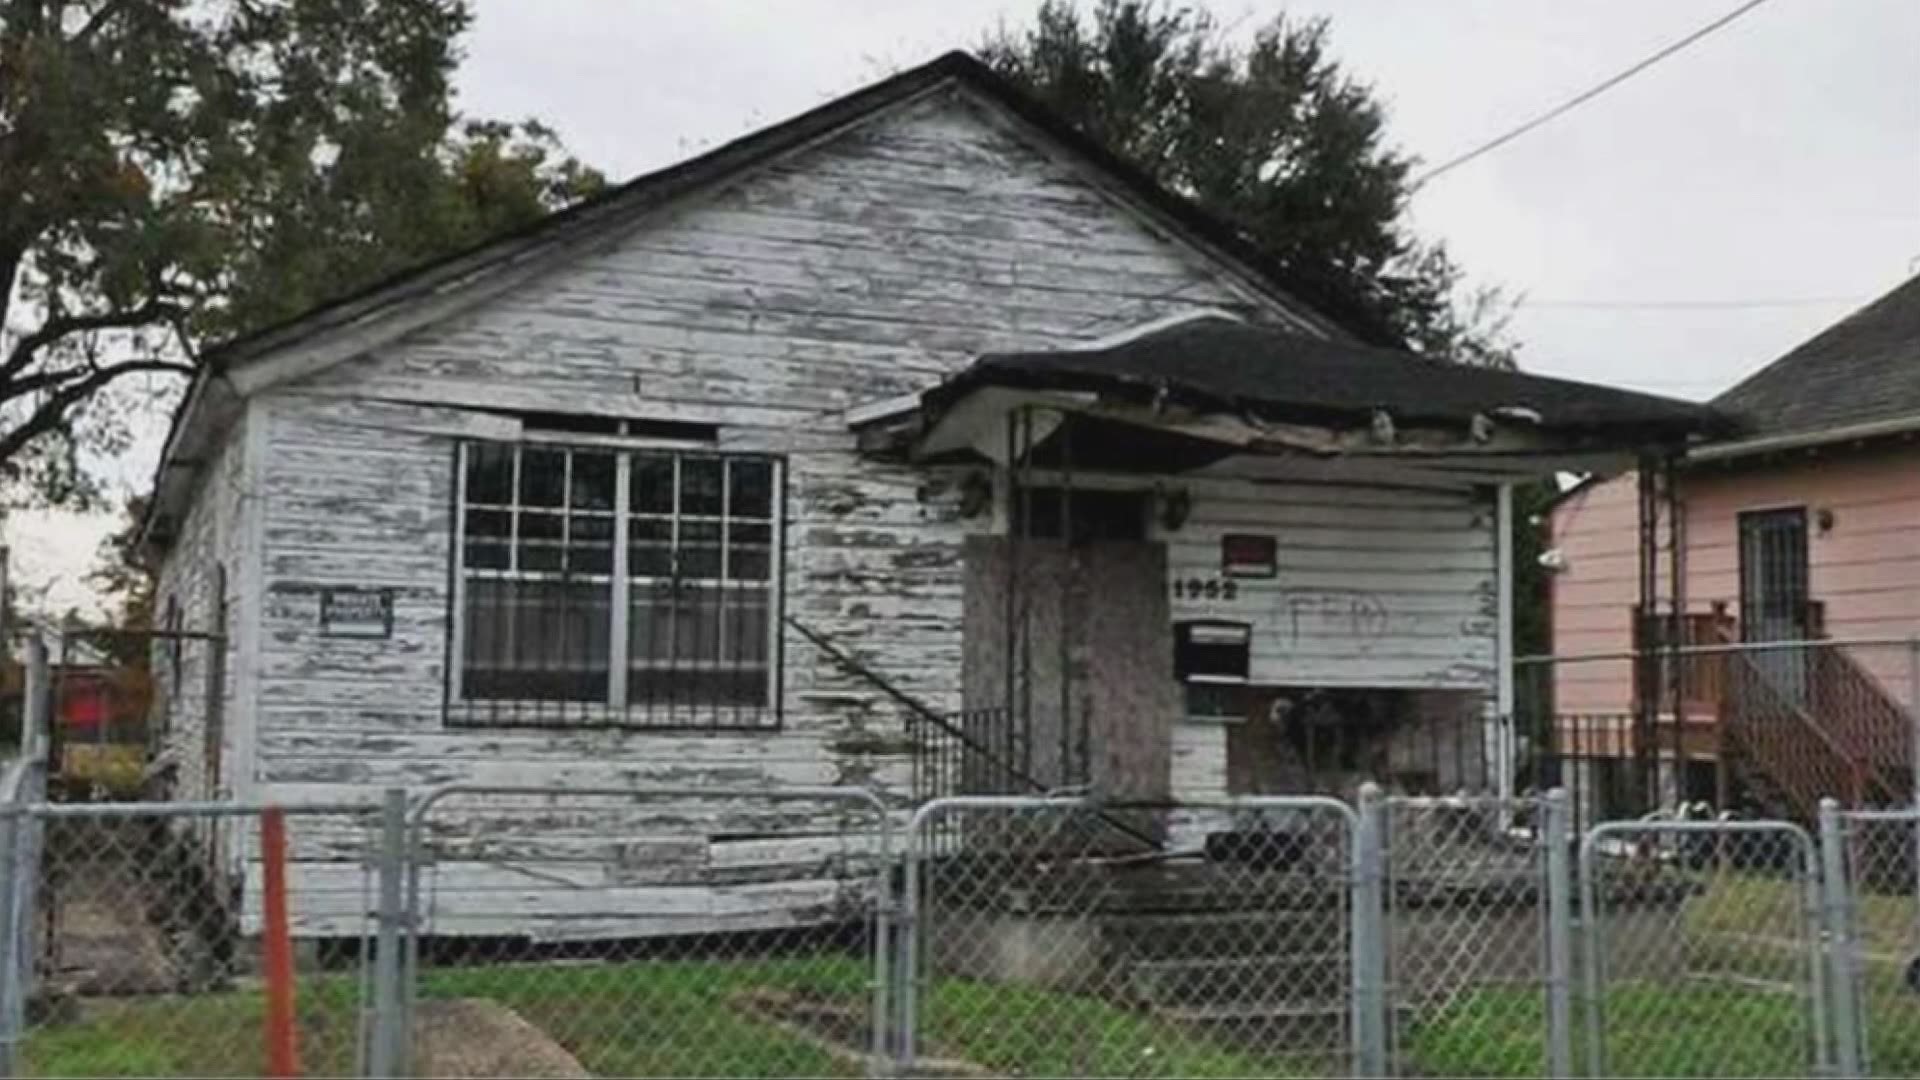 New Orleanians are hoping to see a change in the number of blighted properties plaguing the city.